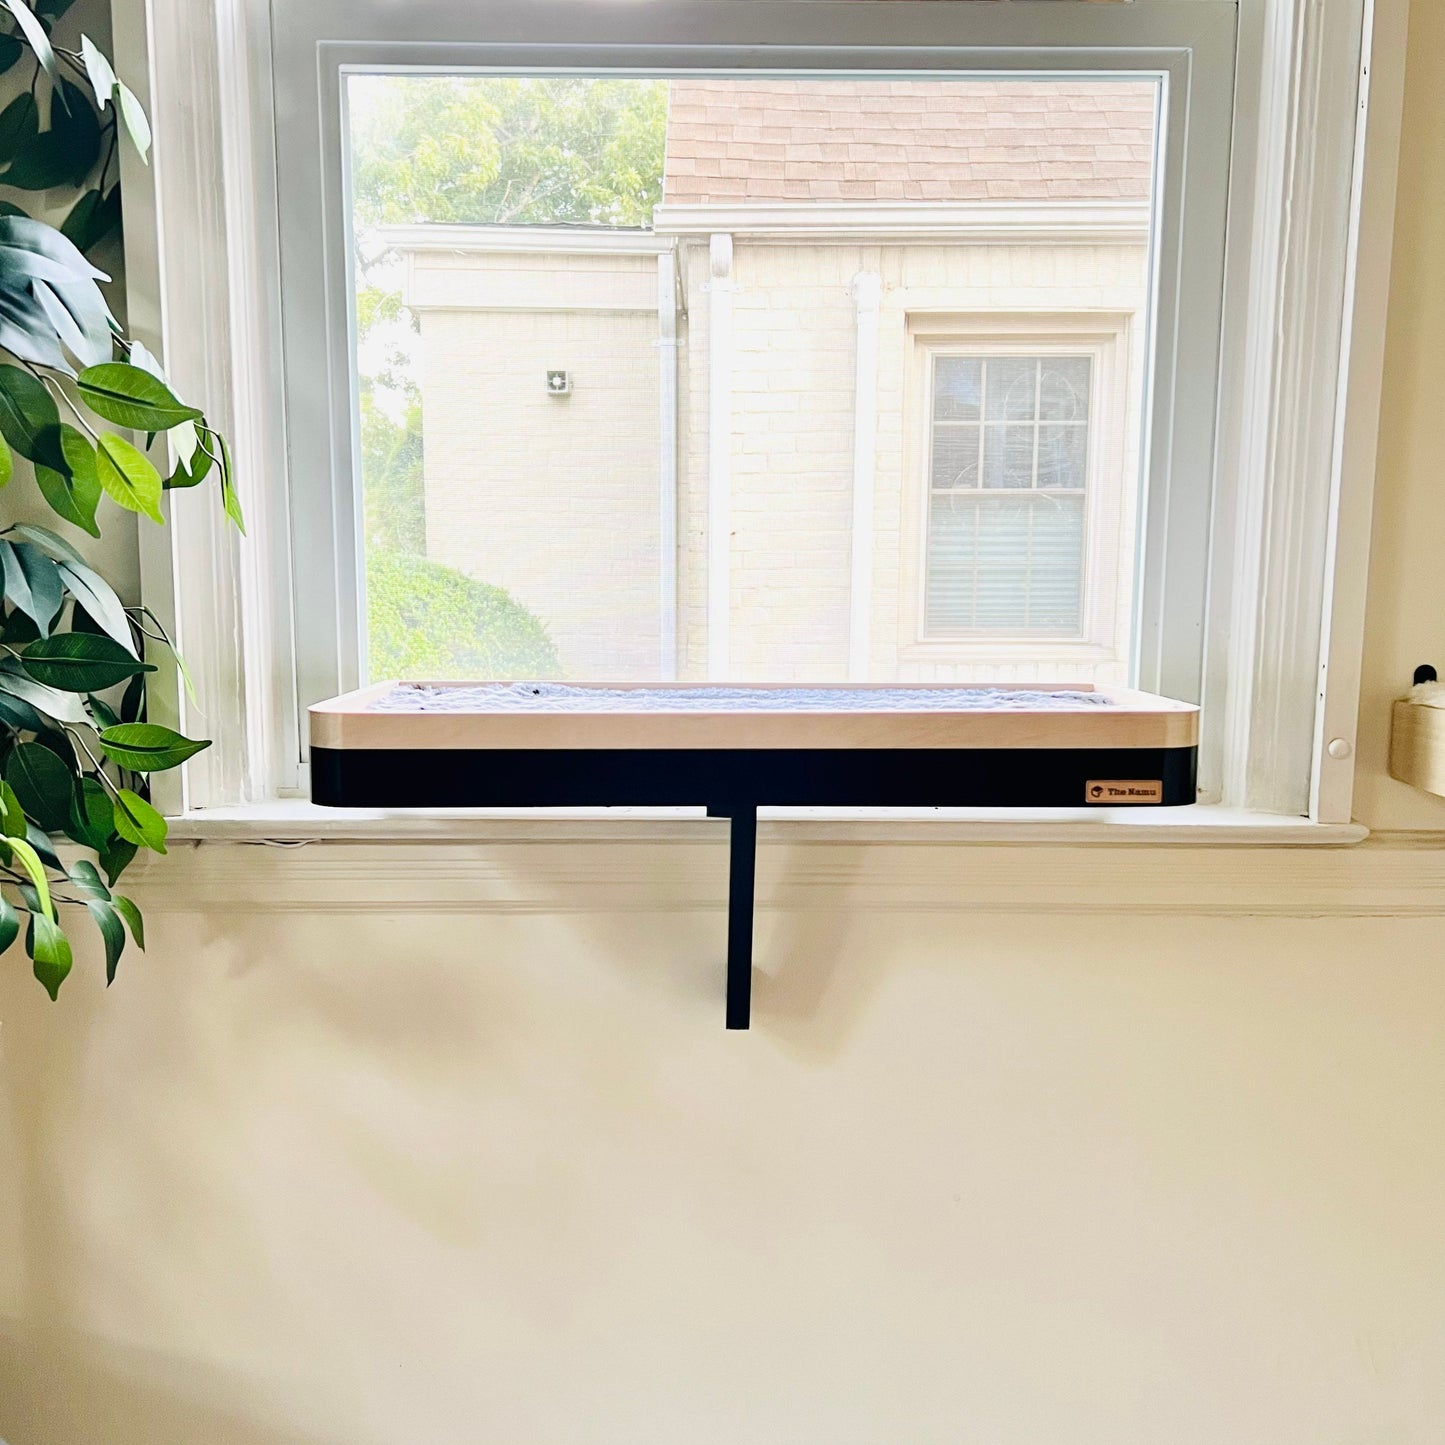 Black Cat Window Perch _Sturdy-Safe support leg _Cat Window Shelf _Installed-removed 1 minute _No tools No nails _Cat Lover Gift _23" x 10"